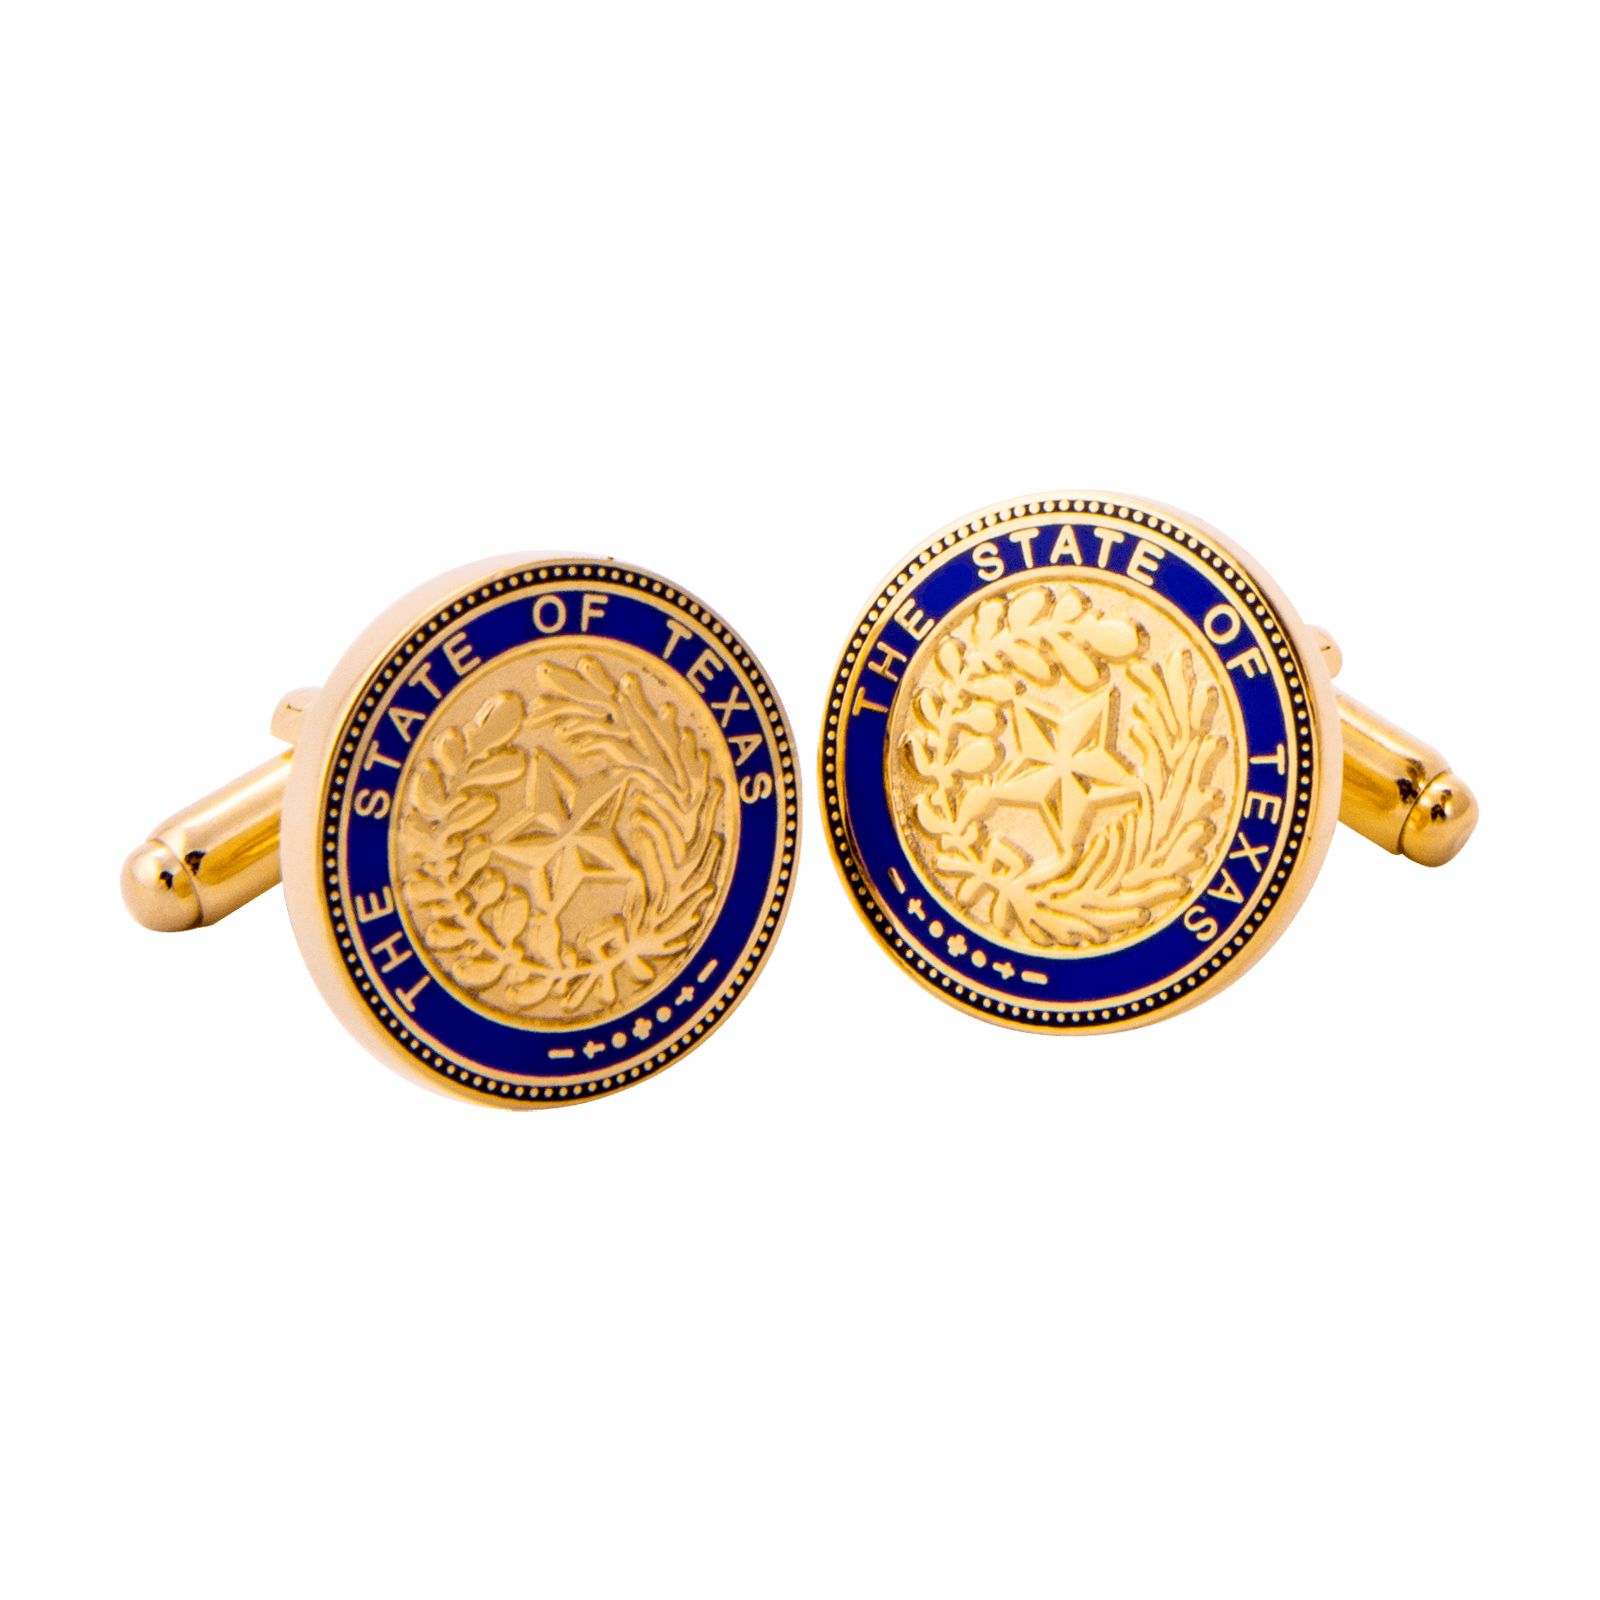 Texas State Seal Blue and Gold-Tone Cuff Links